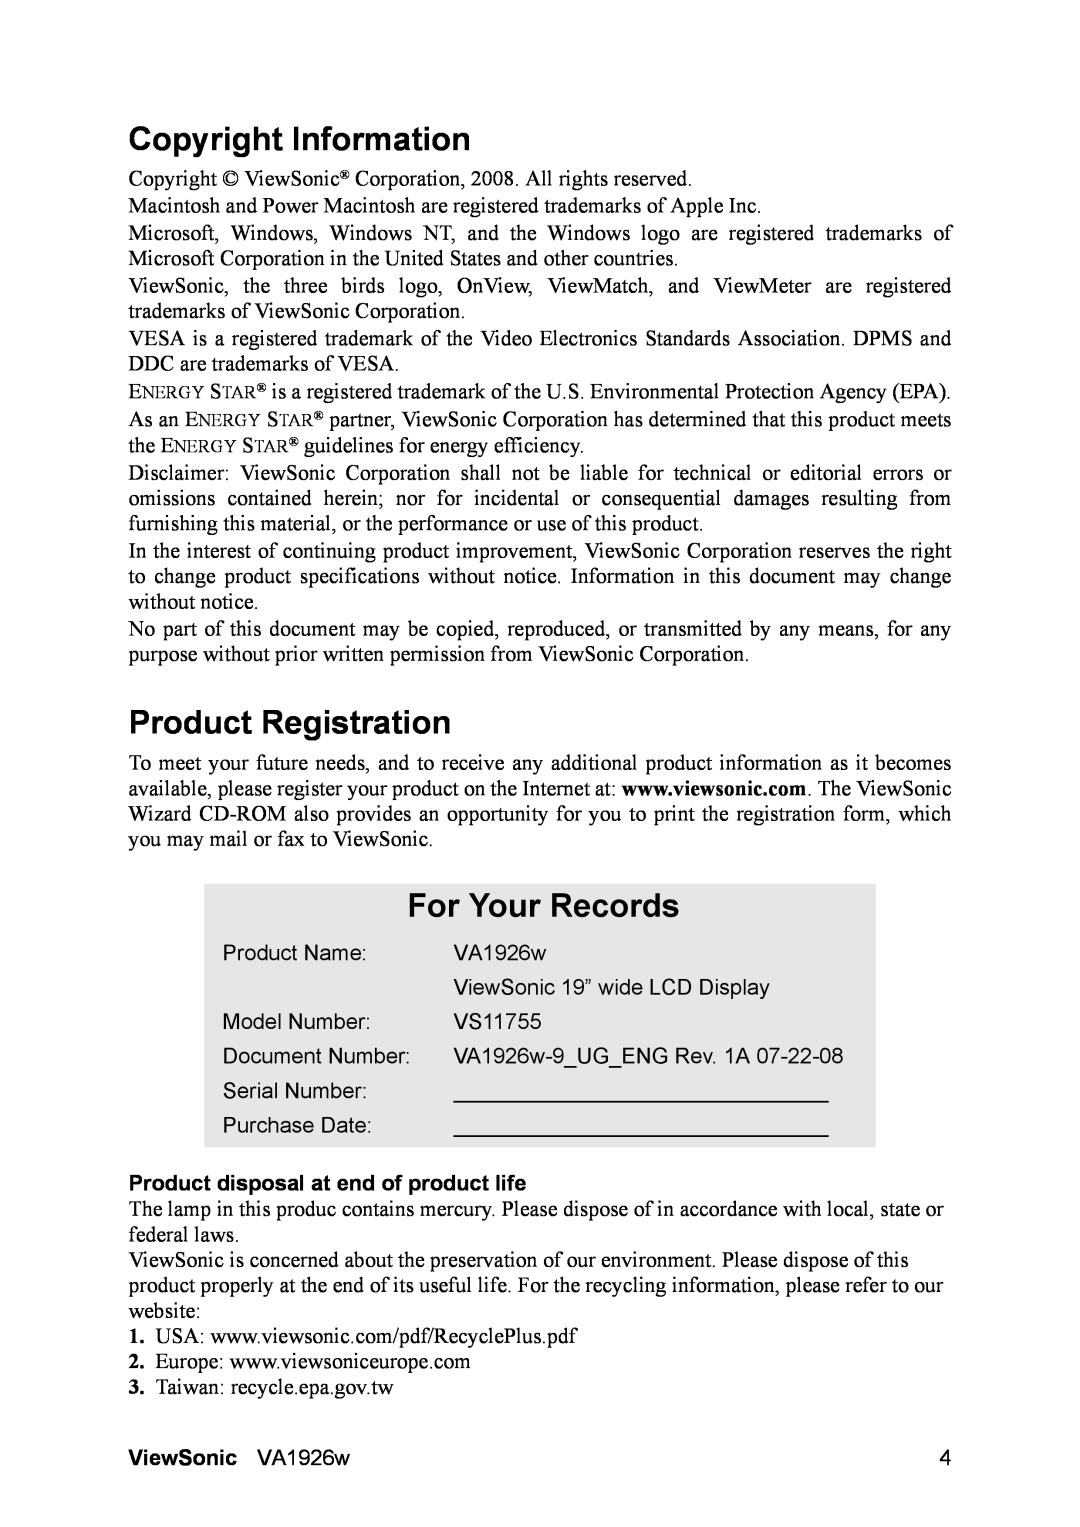 ViewSonic VS11755 Copyright Information, Product Registration, For Your Records, Product disposal at end of product life 